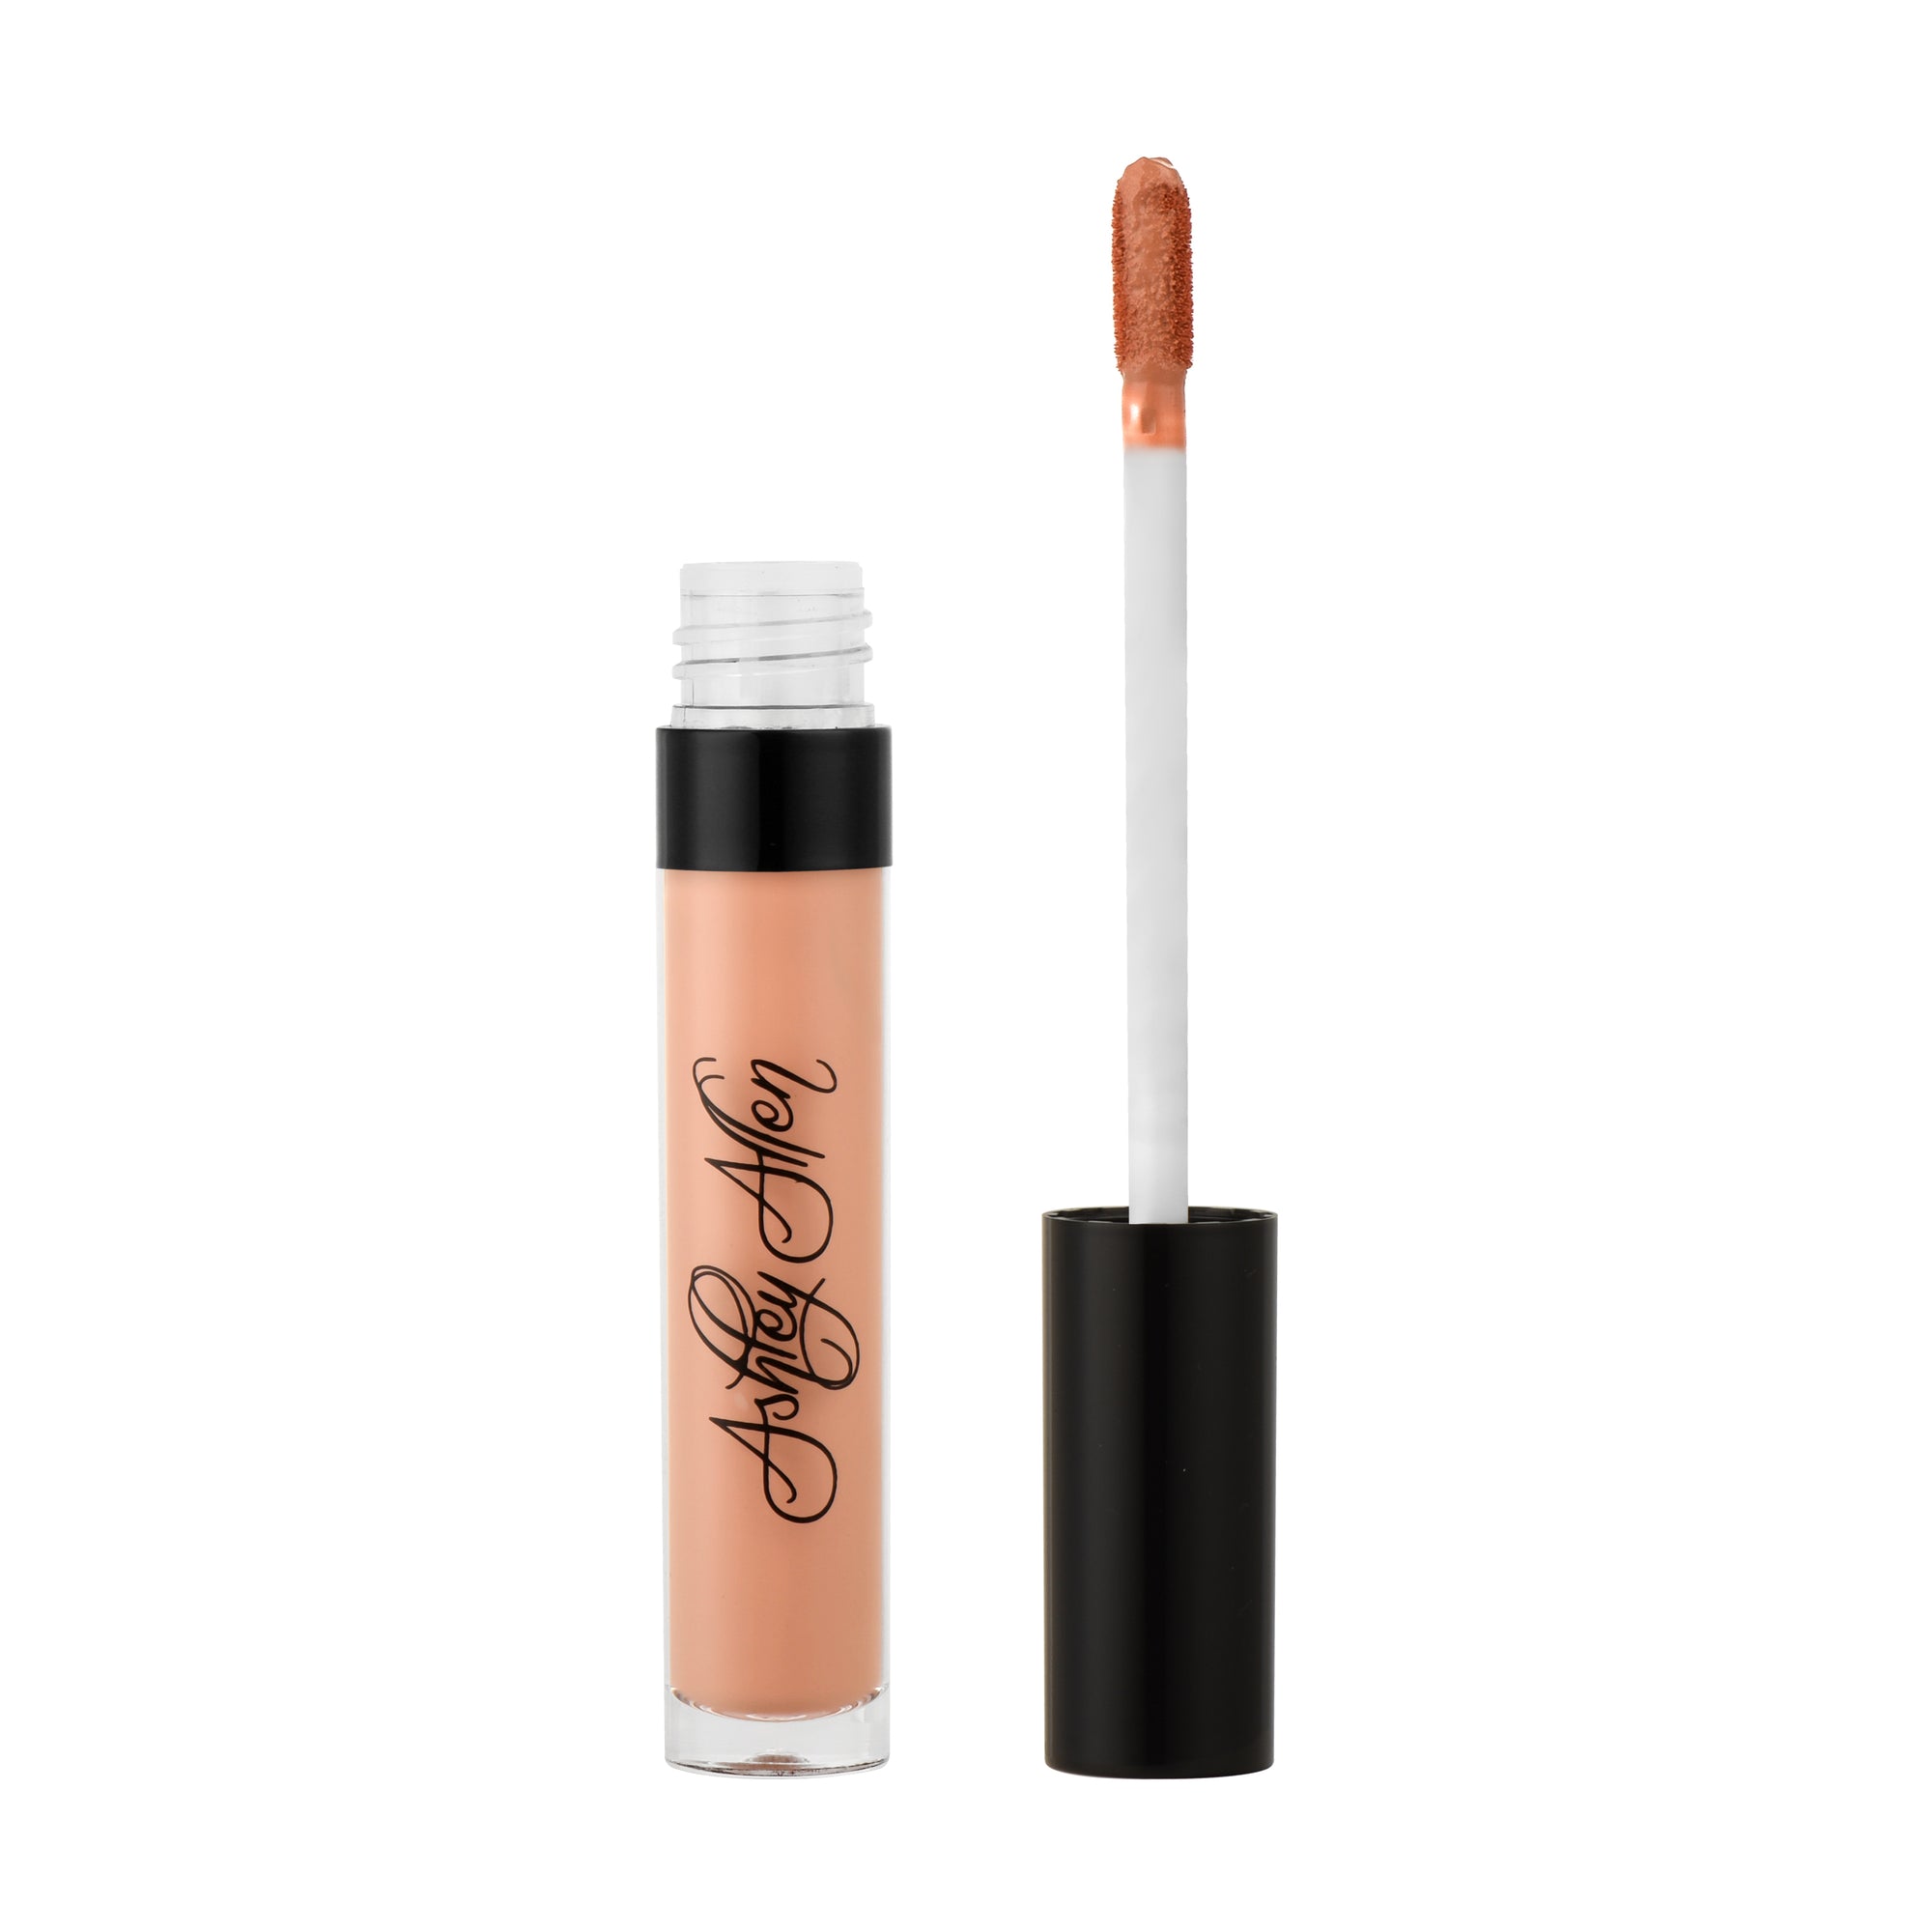 Lip Kit N3 (50% OFF) will be $40.00 Activated at checkouts